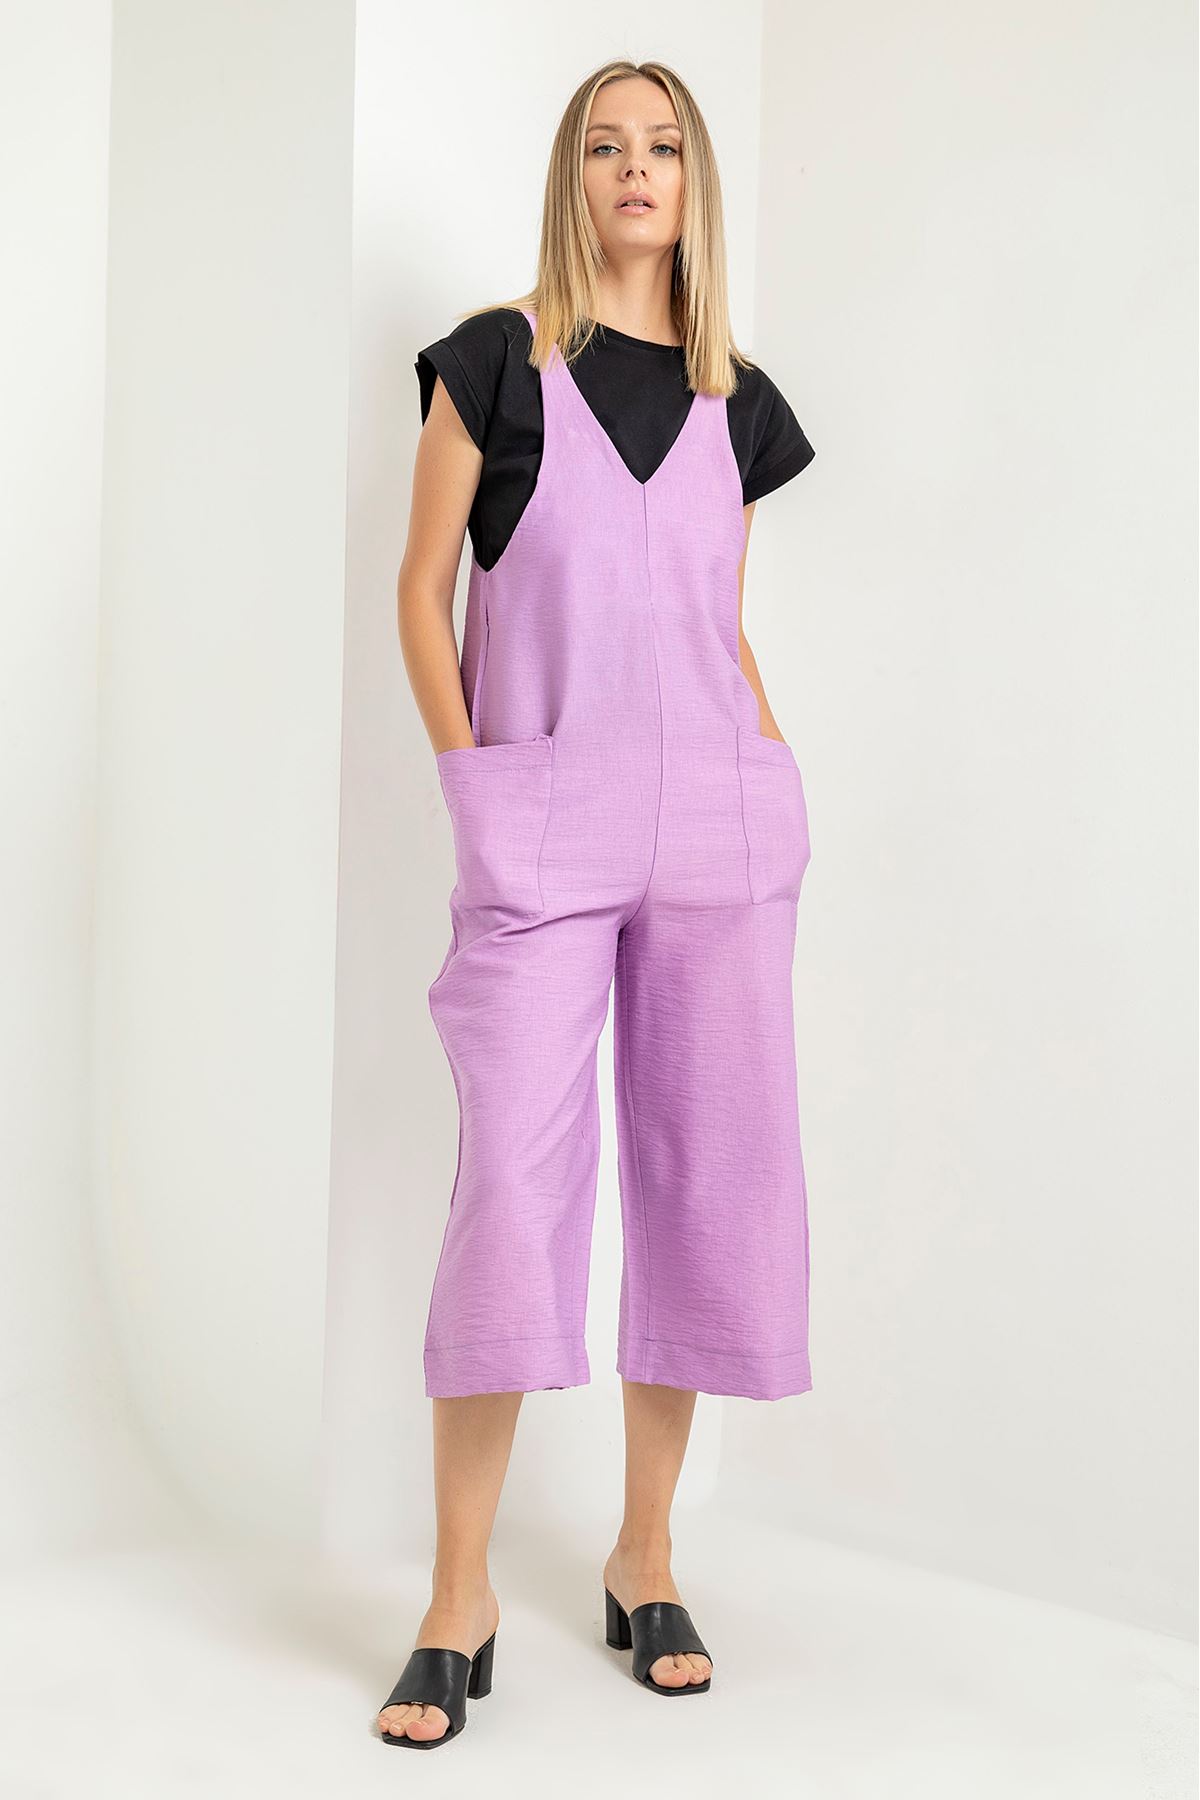 Linen Fabric On The Straps V-Neck Midi Front Pocket Women Overalls - Lilac